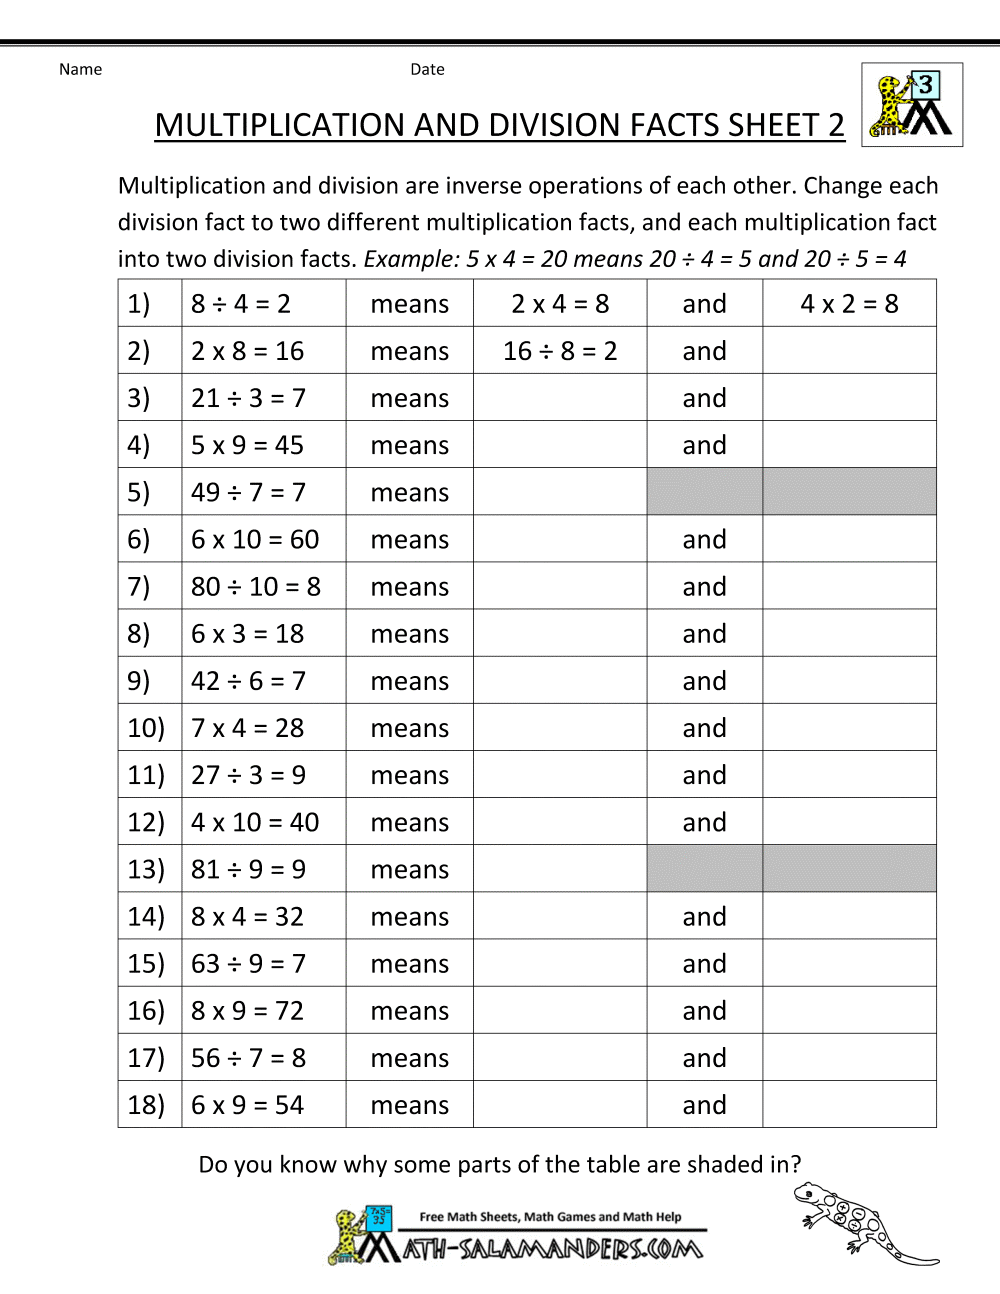 Relate Multiplication And Division Worksheets 